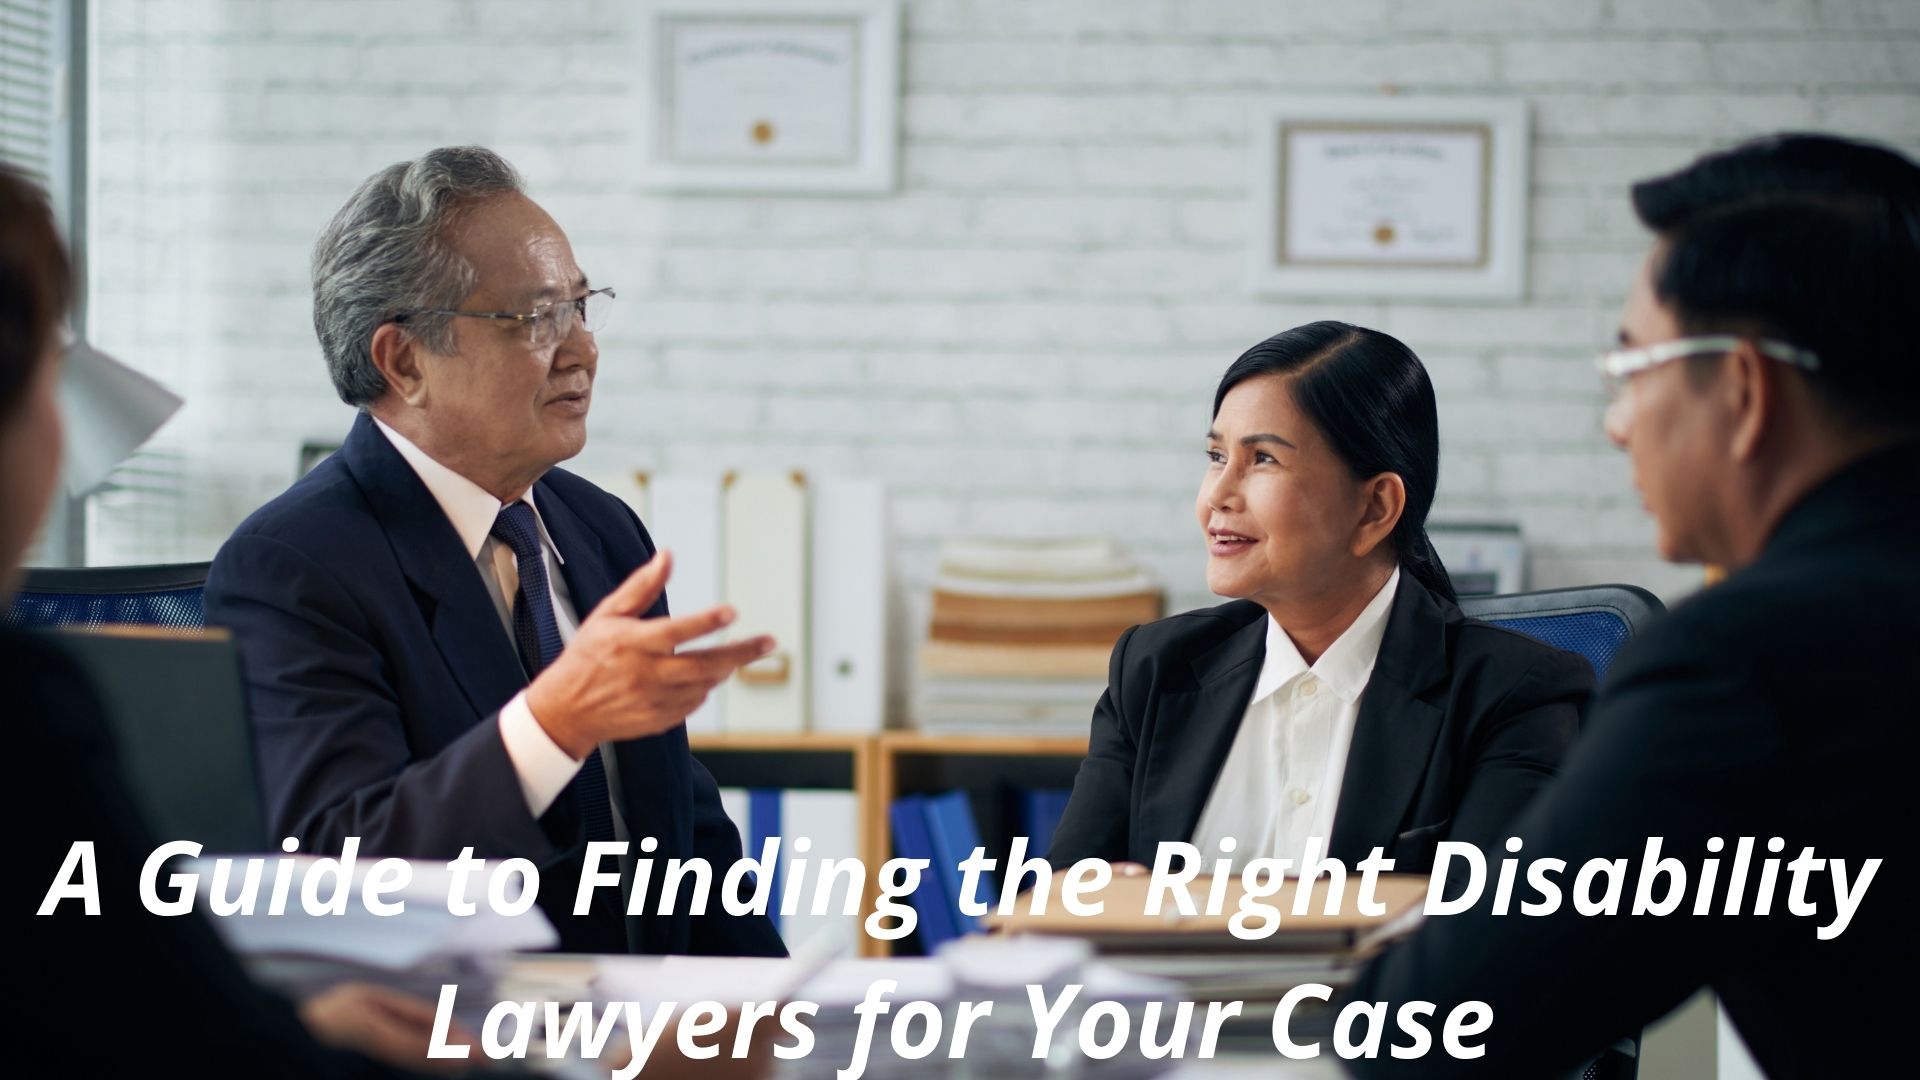 Finding the Right Disability Lawyers for Your Case